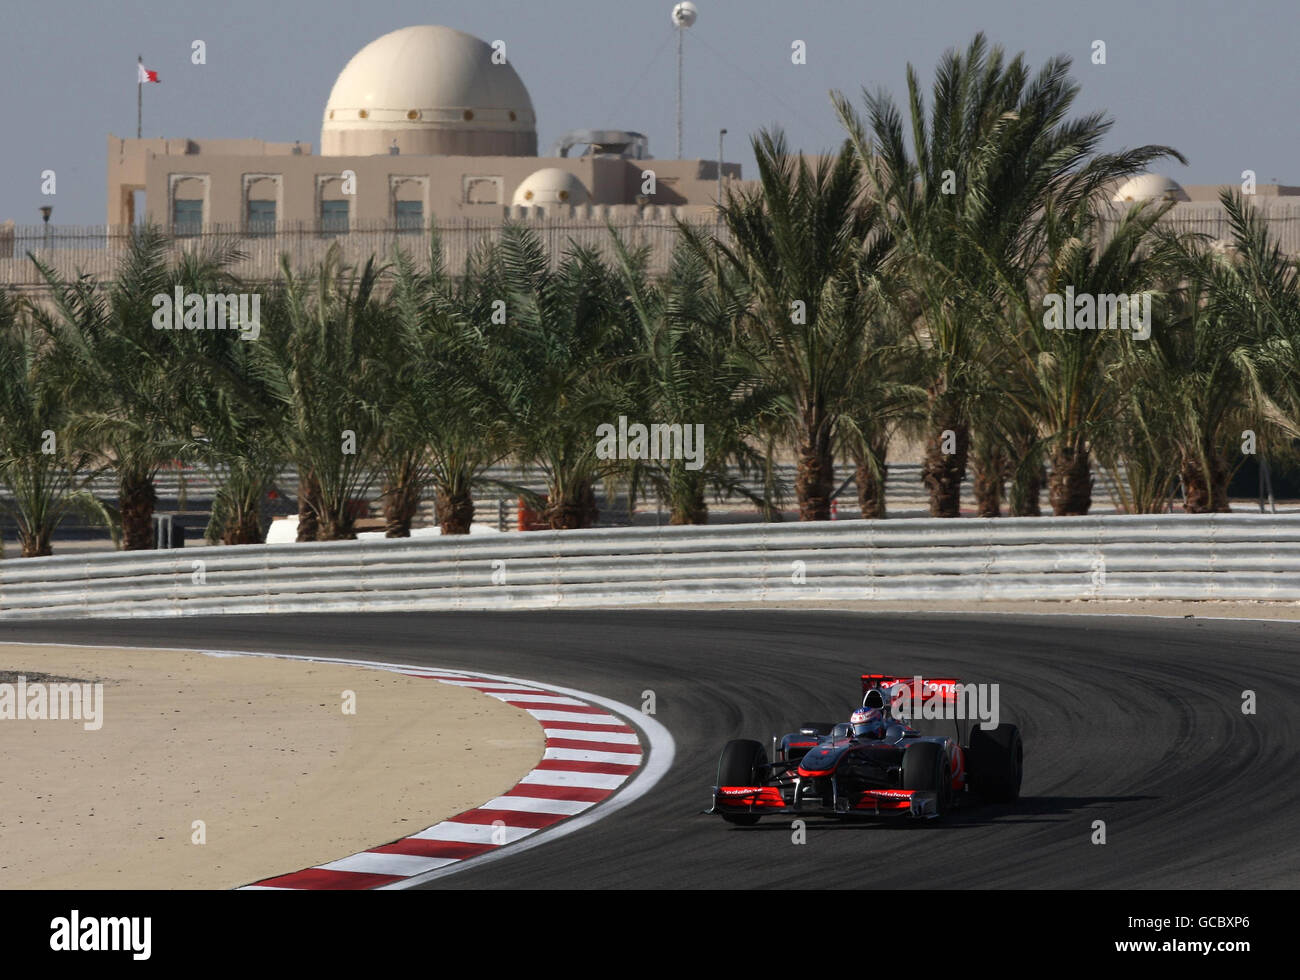 Mclaren driver Jenson Button on his way to 7th place during the Gulf Air Bahrain Grand Prix at the Bahrain International Circuit in Sakhir, Bahrain. Stock Photo